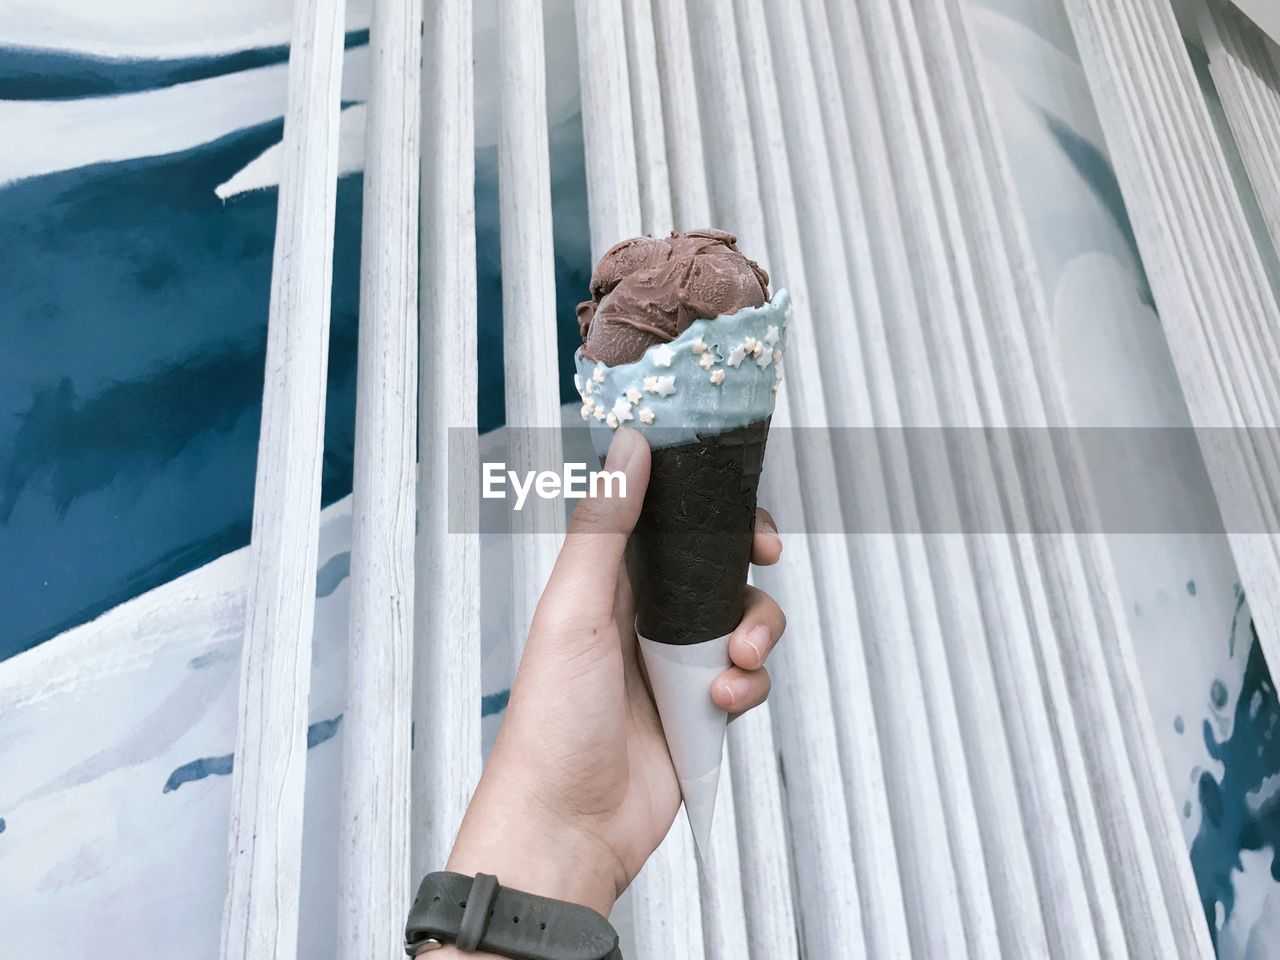 Cropped hand of person holding ice cream cone outdoors